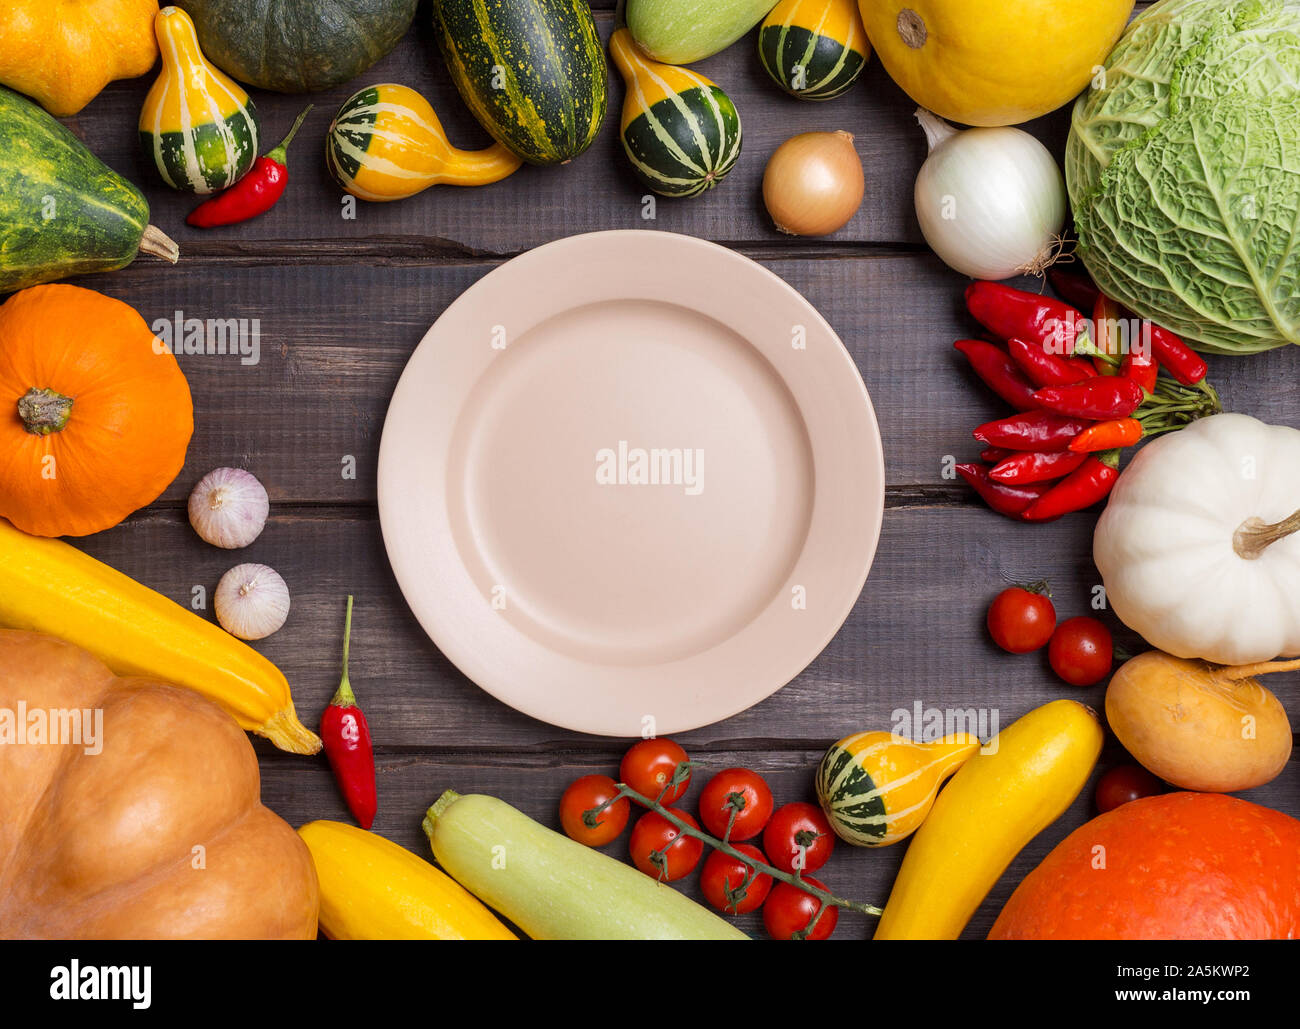 Empty plate with different kinds of harvest vegetables on dark wooden background. Pumpkin, cabbage, onion, tomatoes, garlic, pepper around the empty p Stock Photo